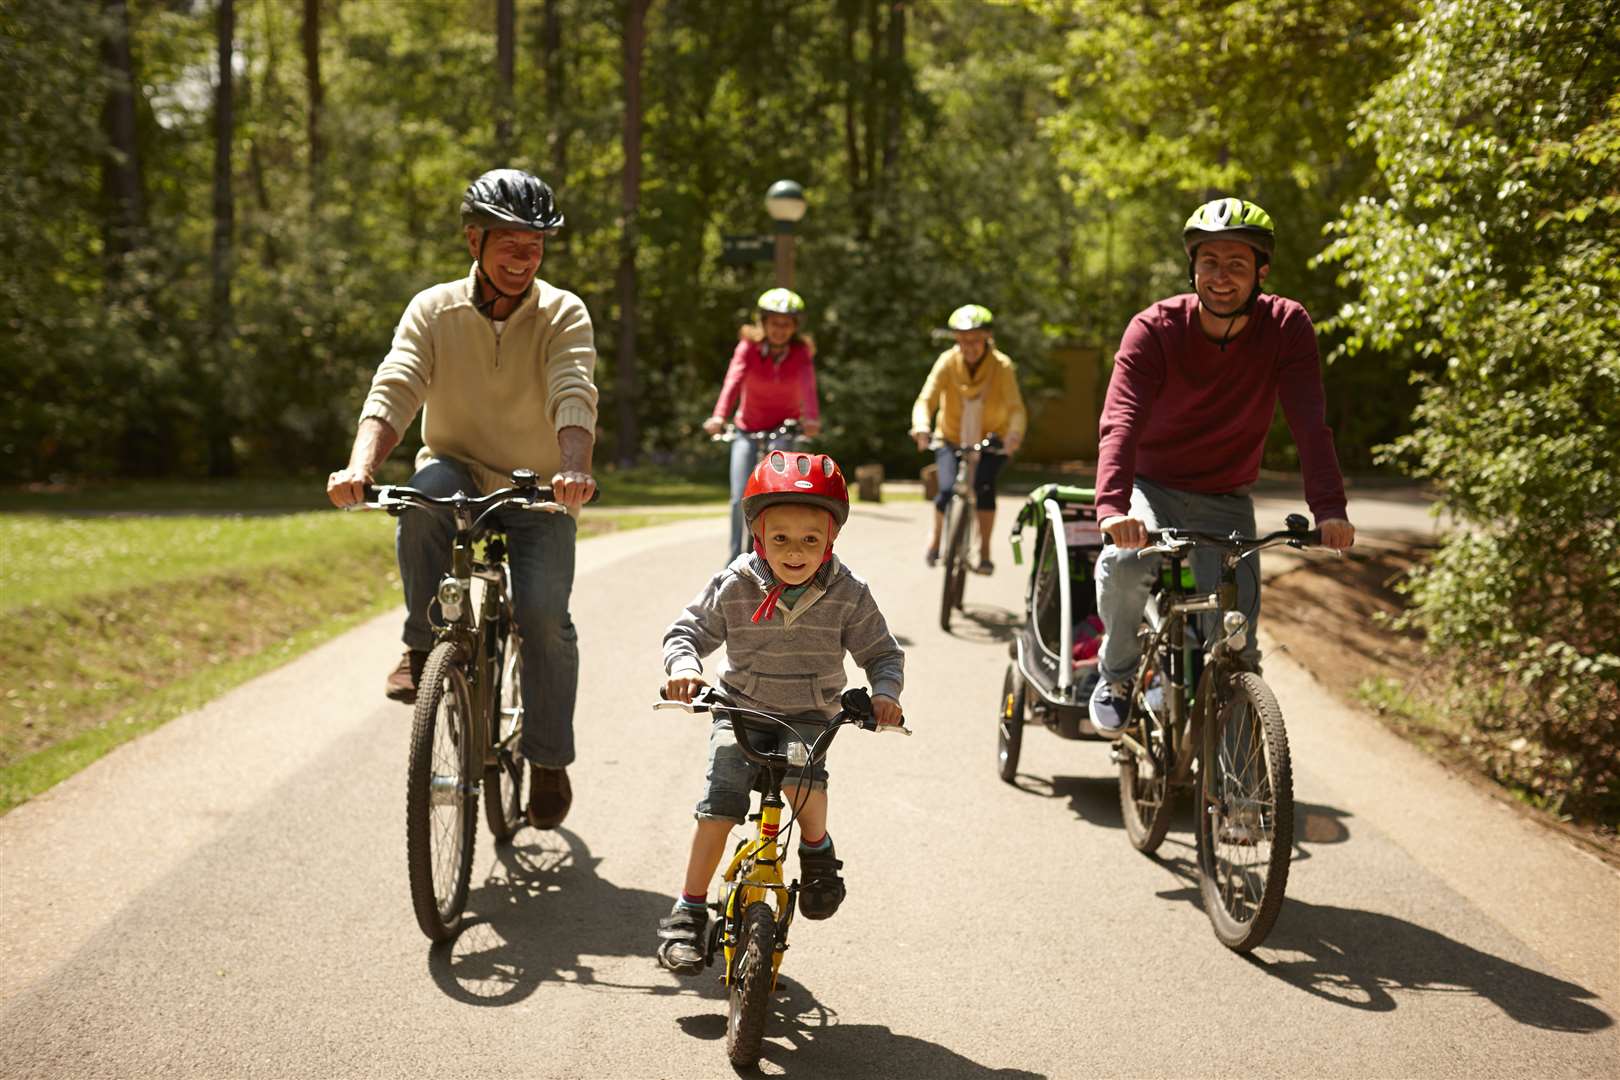 The roads at Centre Parcs are car-free for most of the week